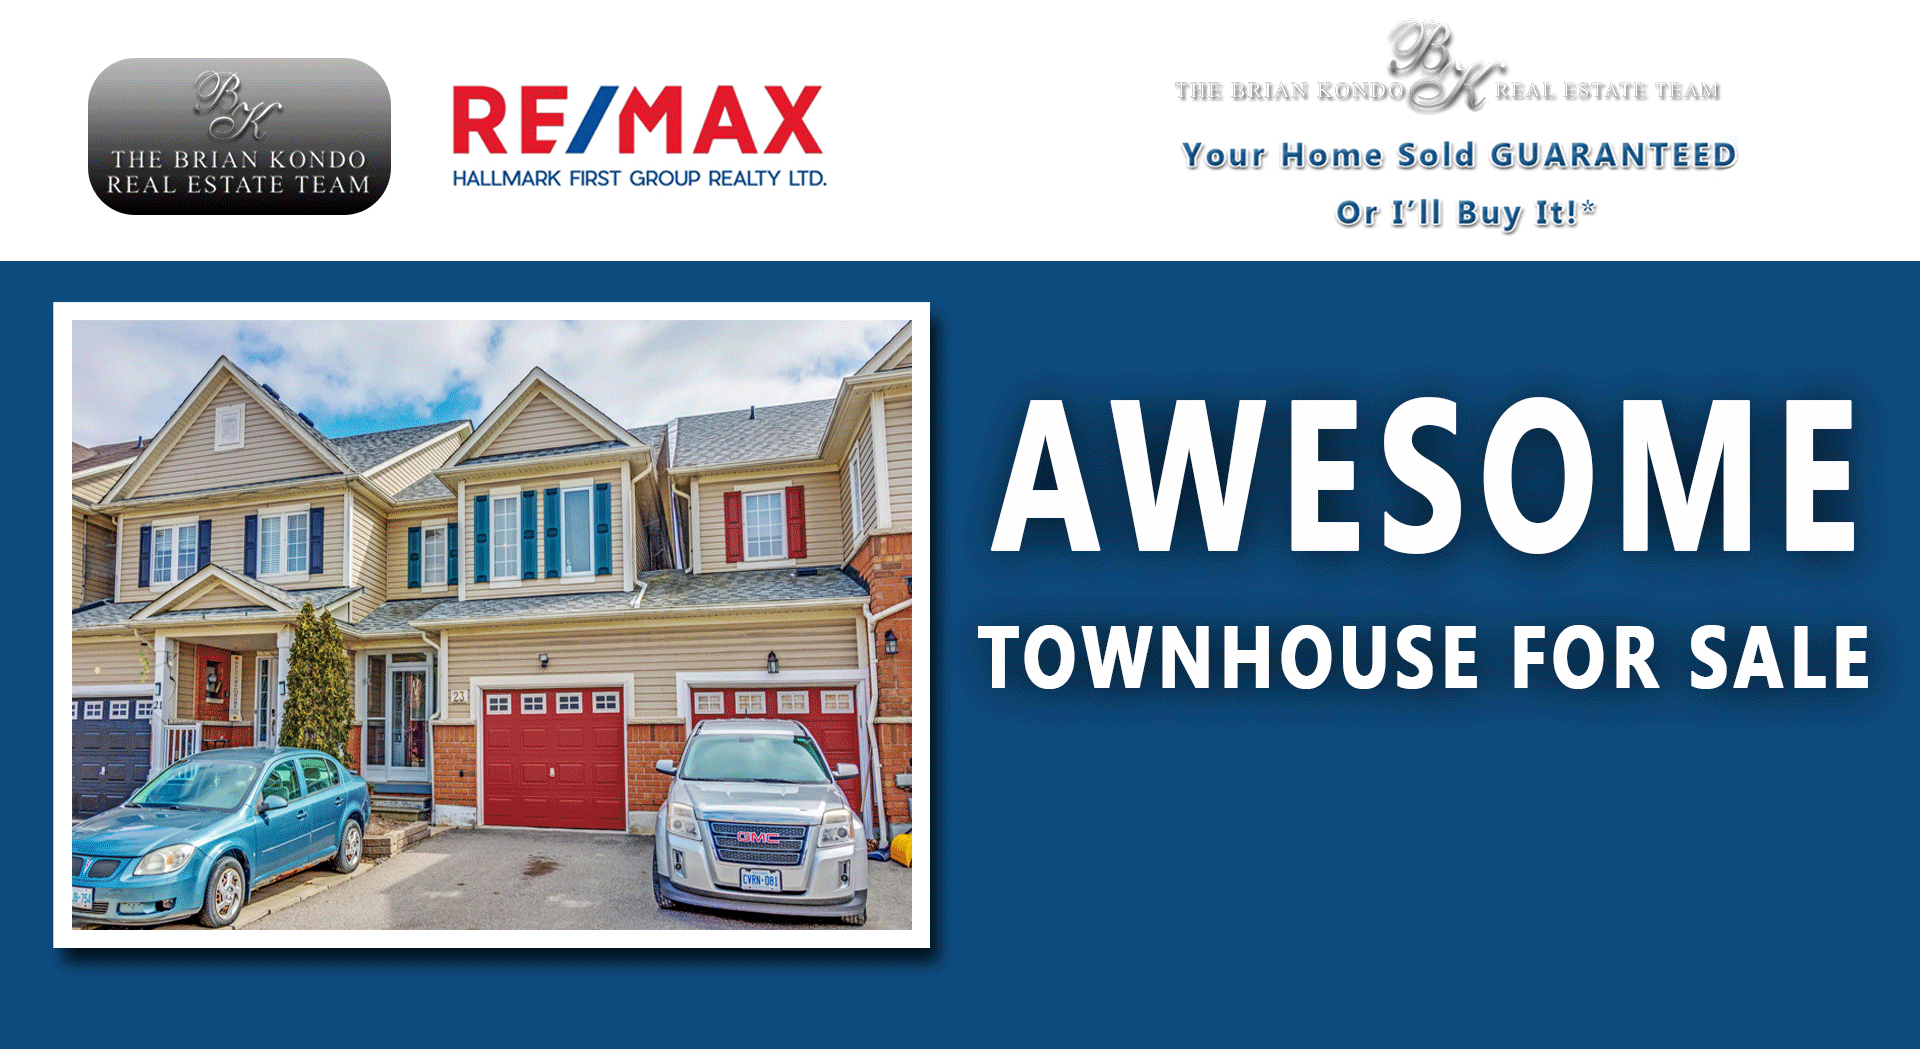 AWESOME TOWNHOUSE FOR SALE | The Brian Kondo Real Estate Team